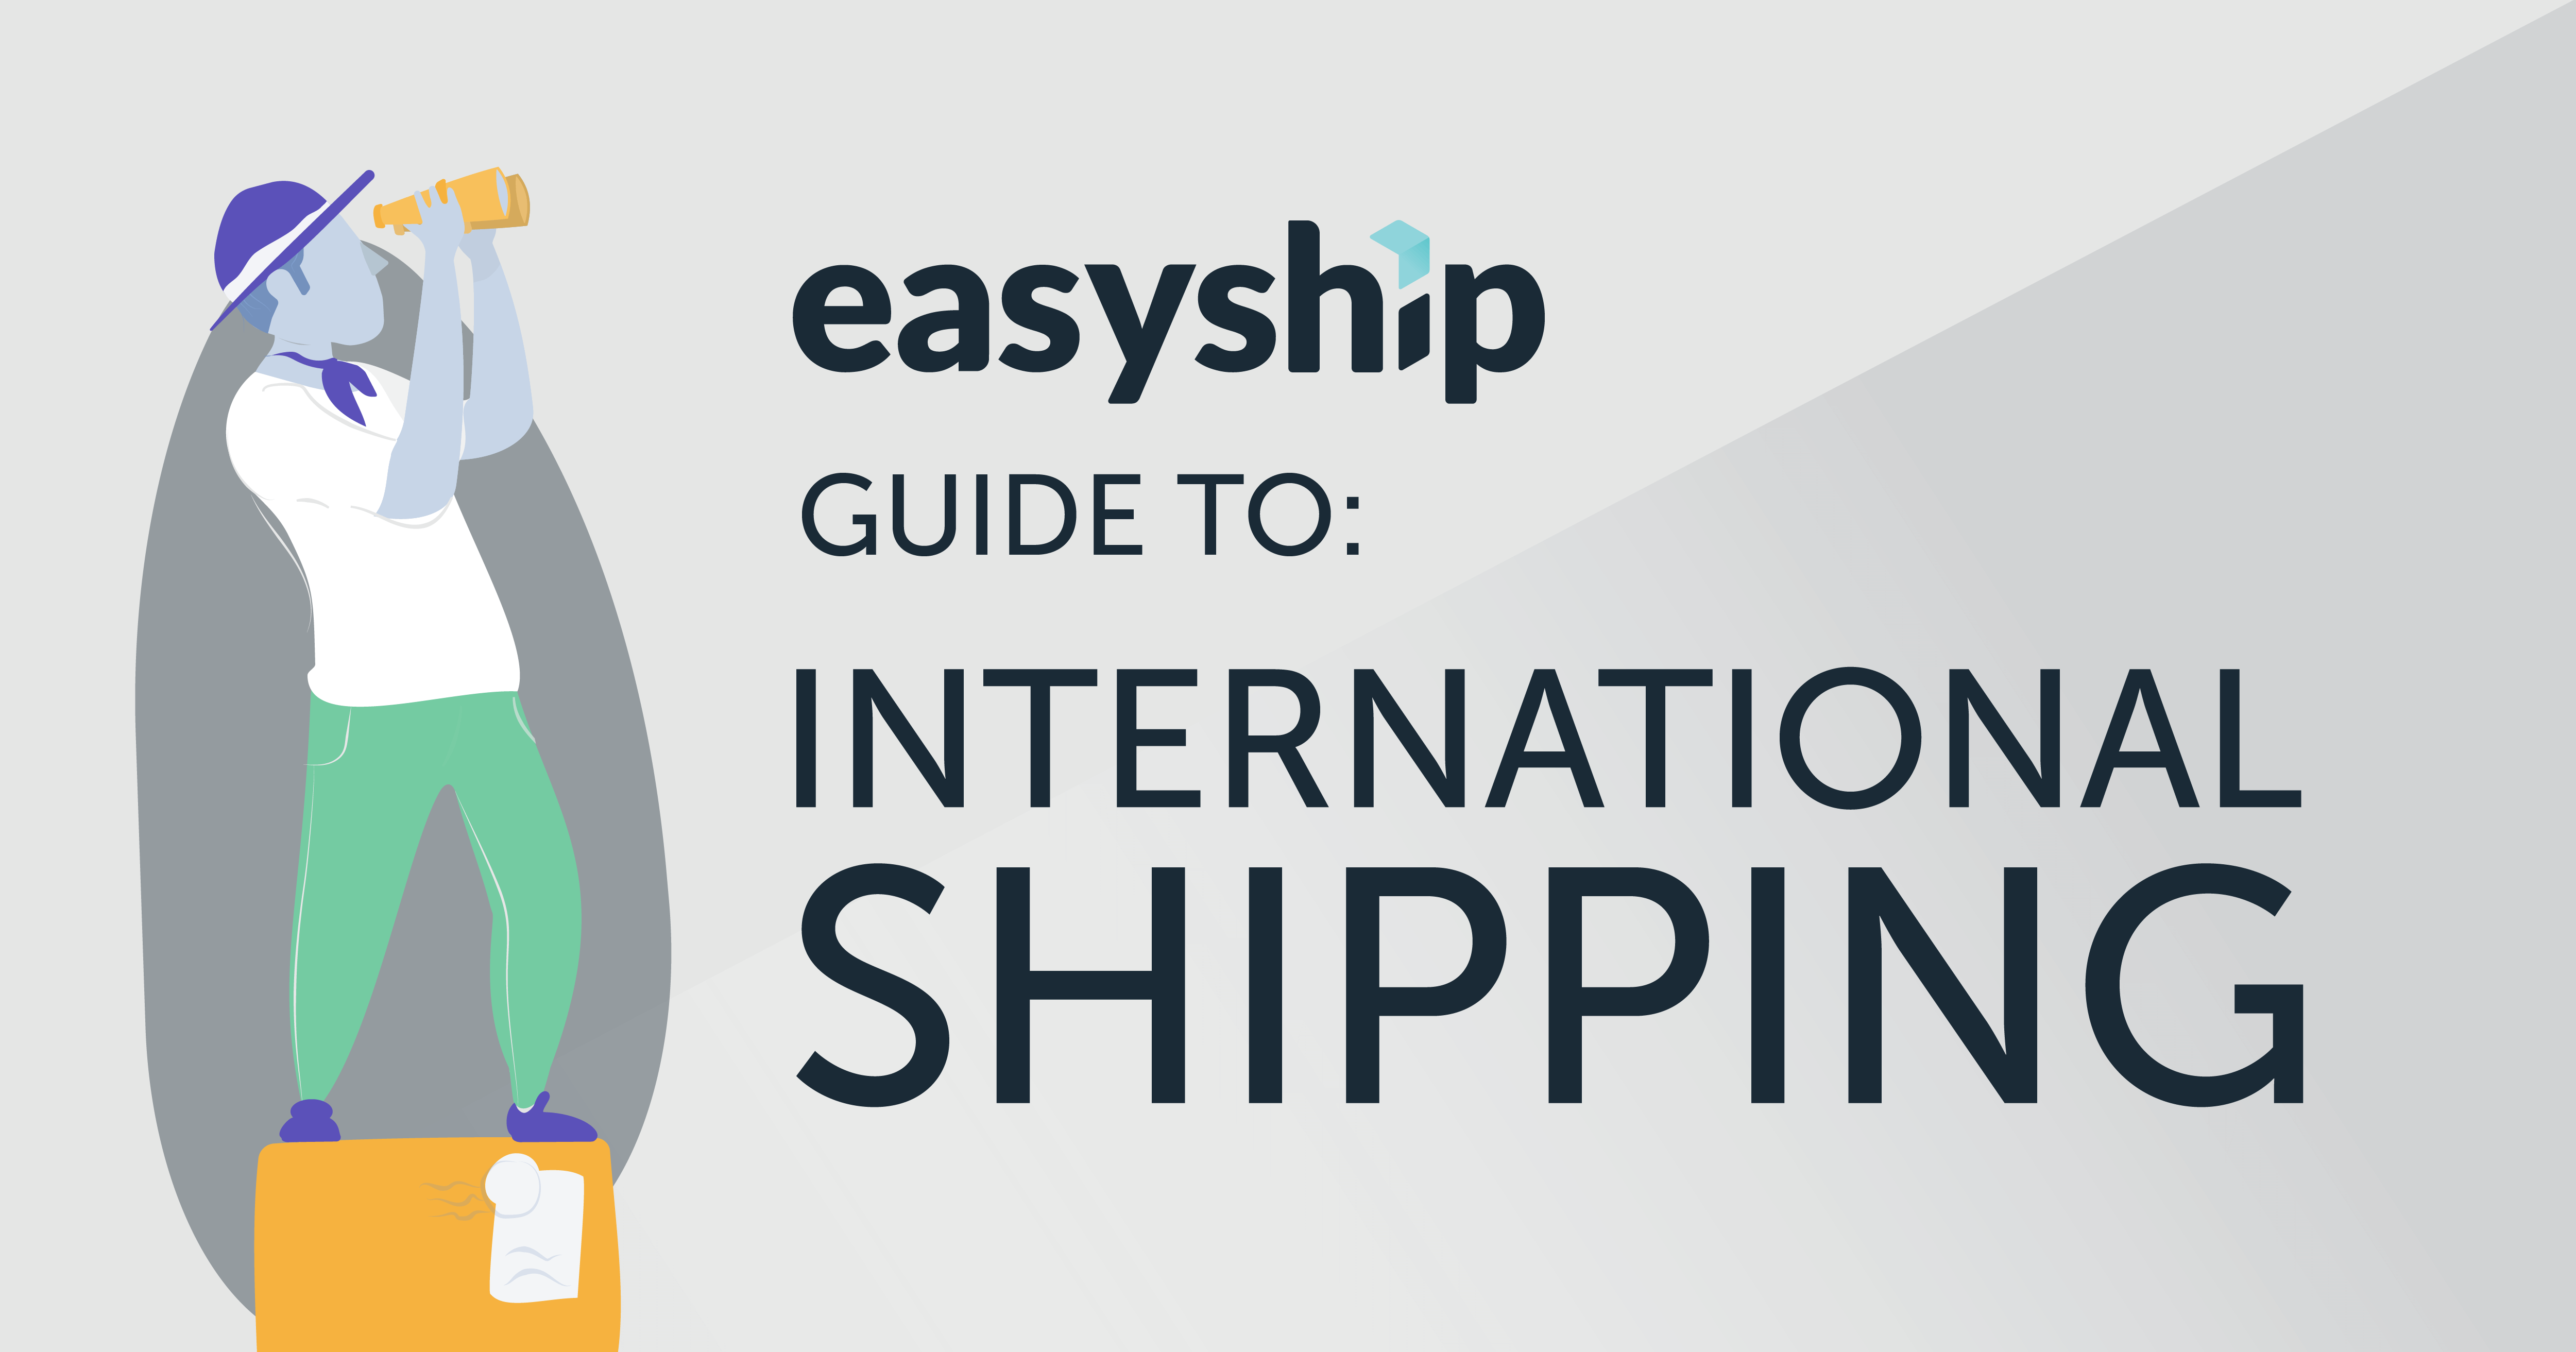 International shopping and shipping made easy